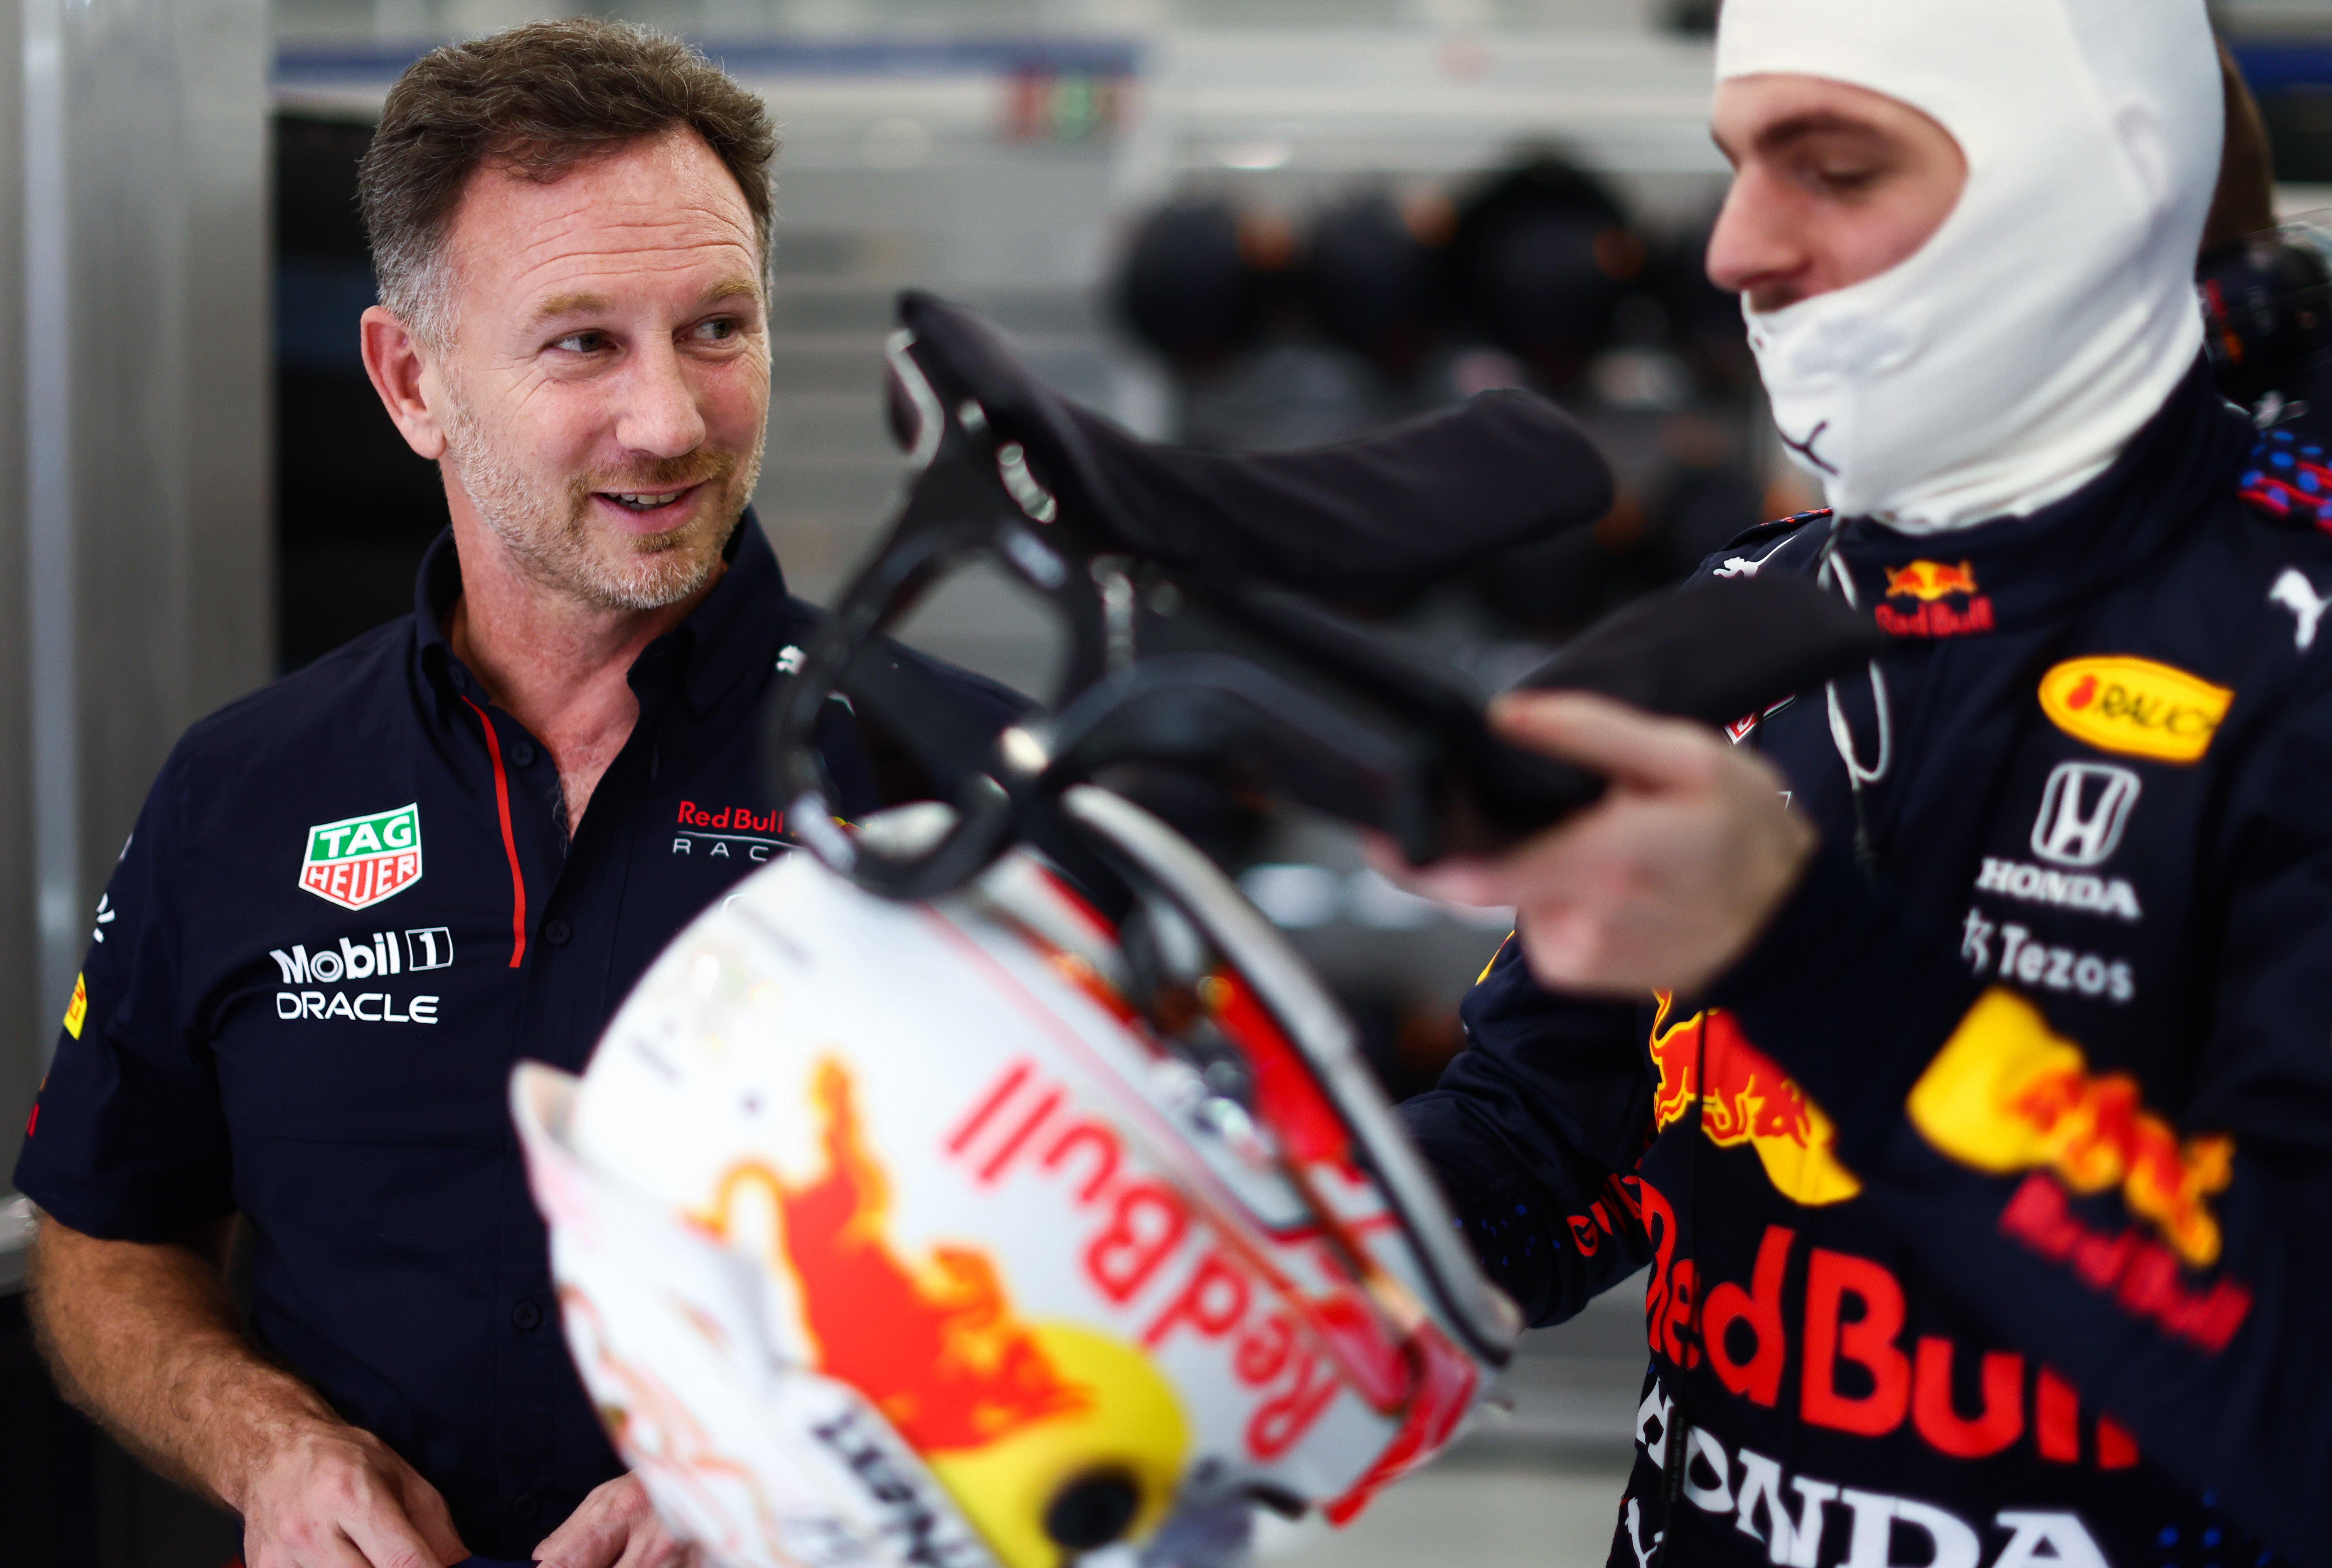 Christian Horner has become a leading character in F1’s drama